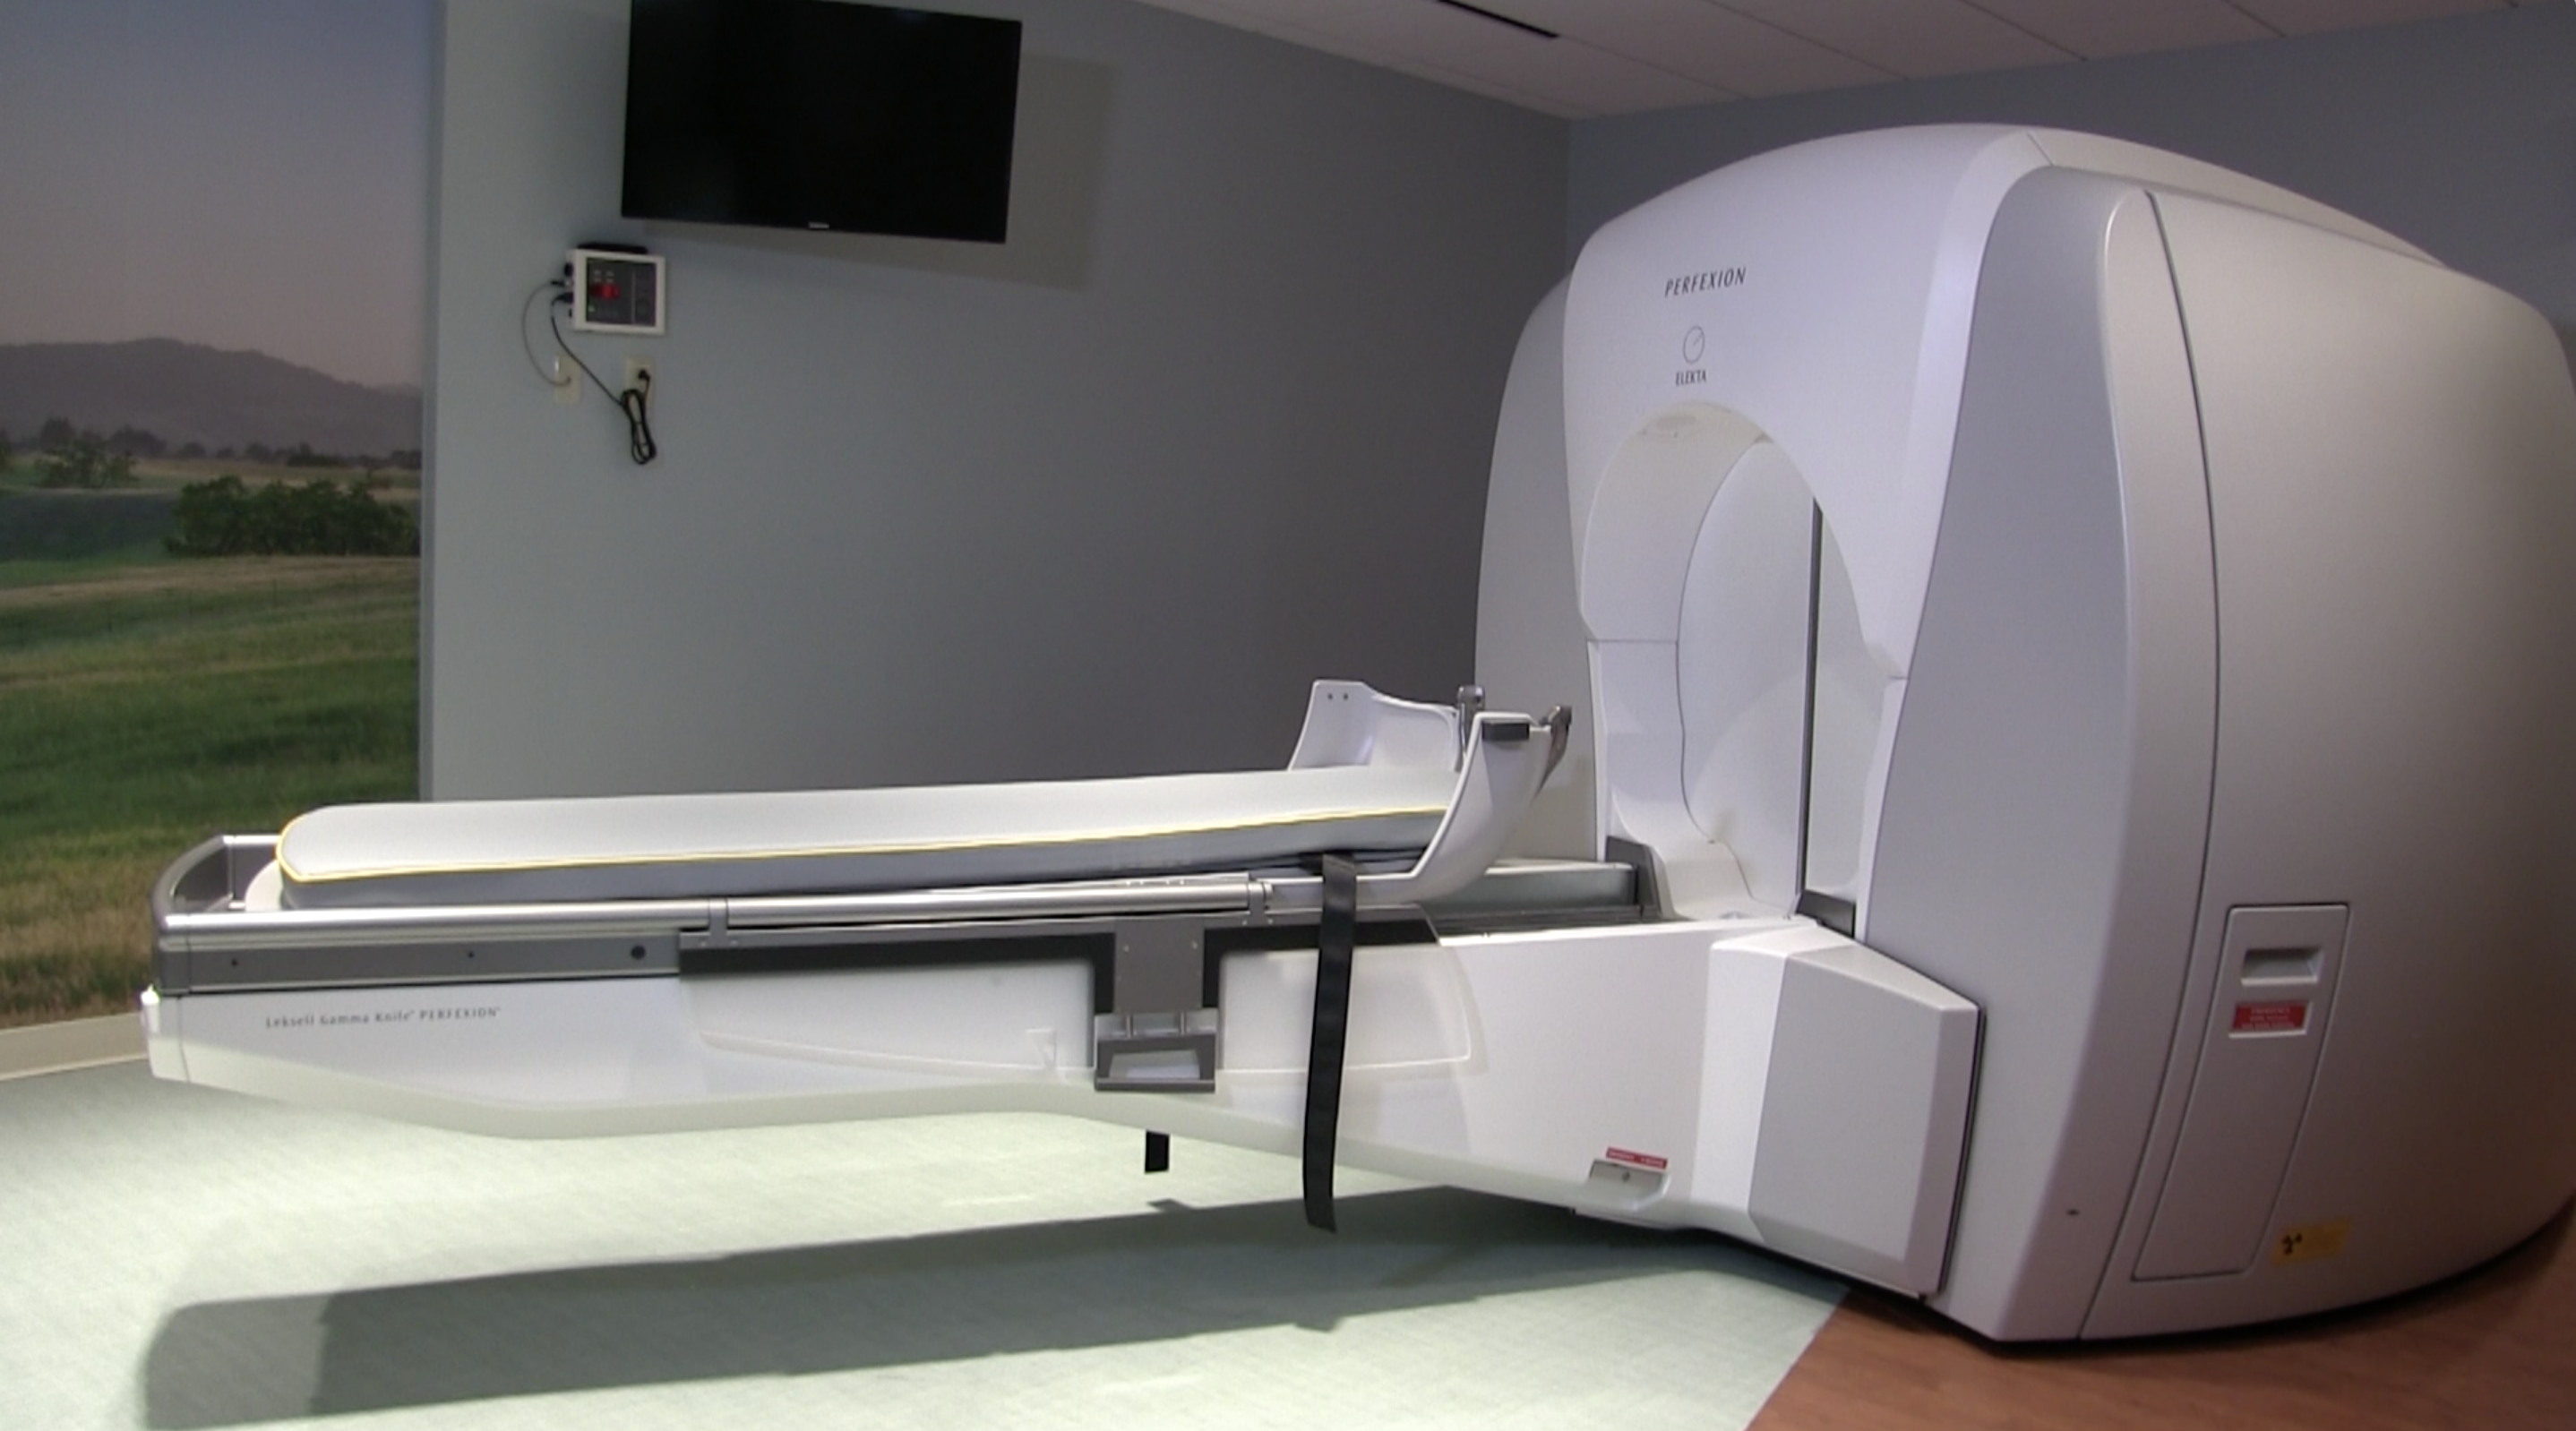 Gamma Knife radiosurgery has become the preferred radiation therapy option for patients with brain tumors at facilities like the Northwestern Medicine Cancer Center, pictured here